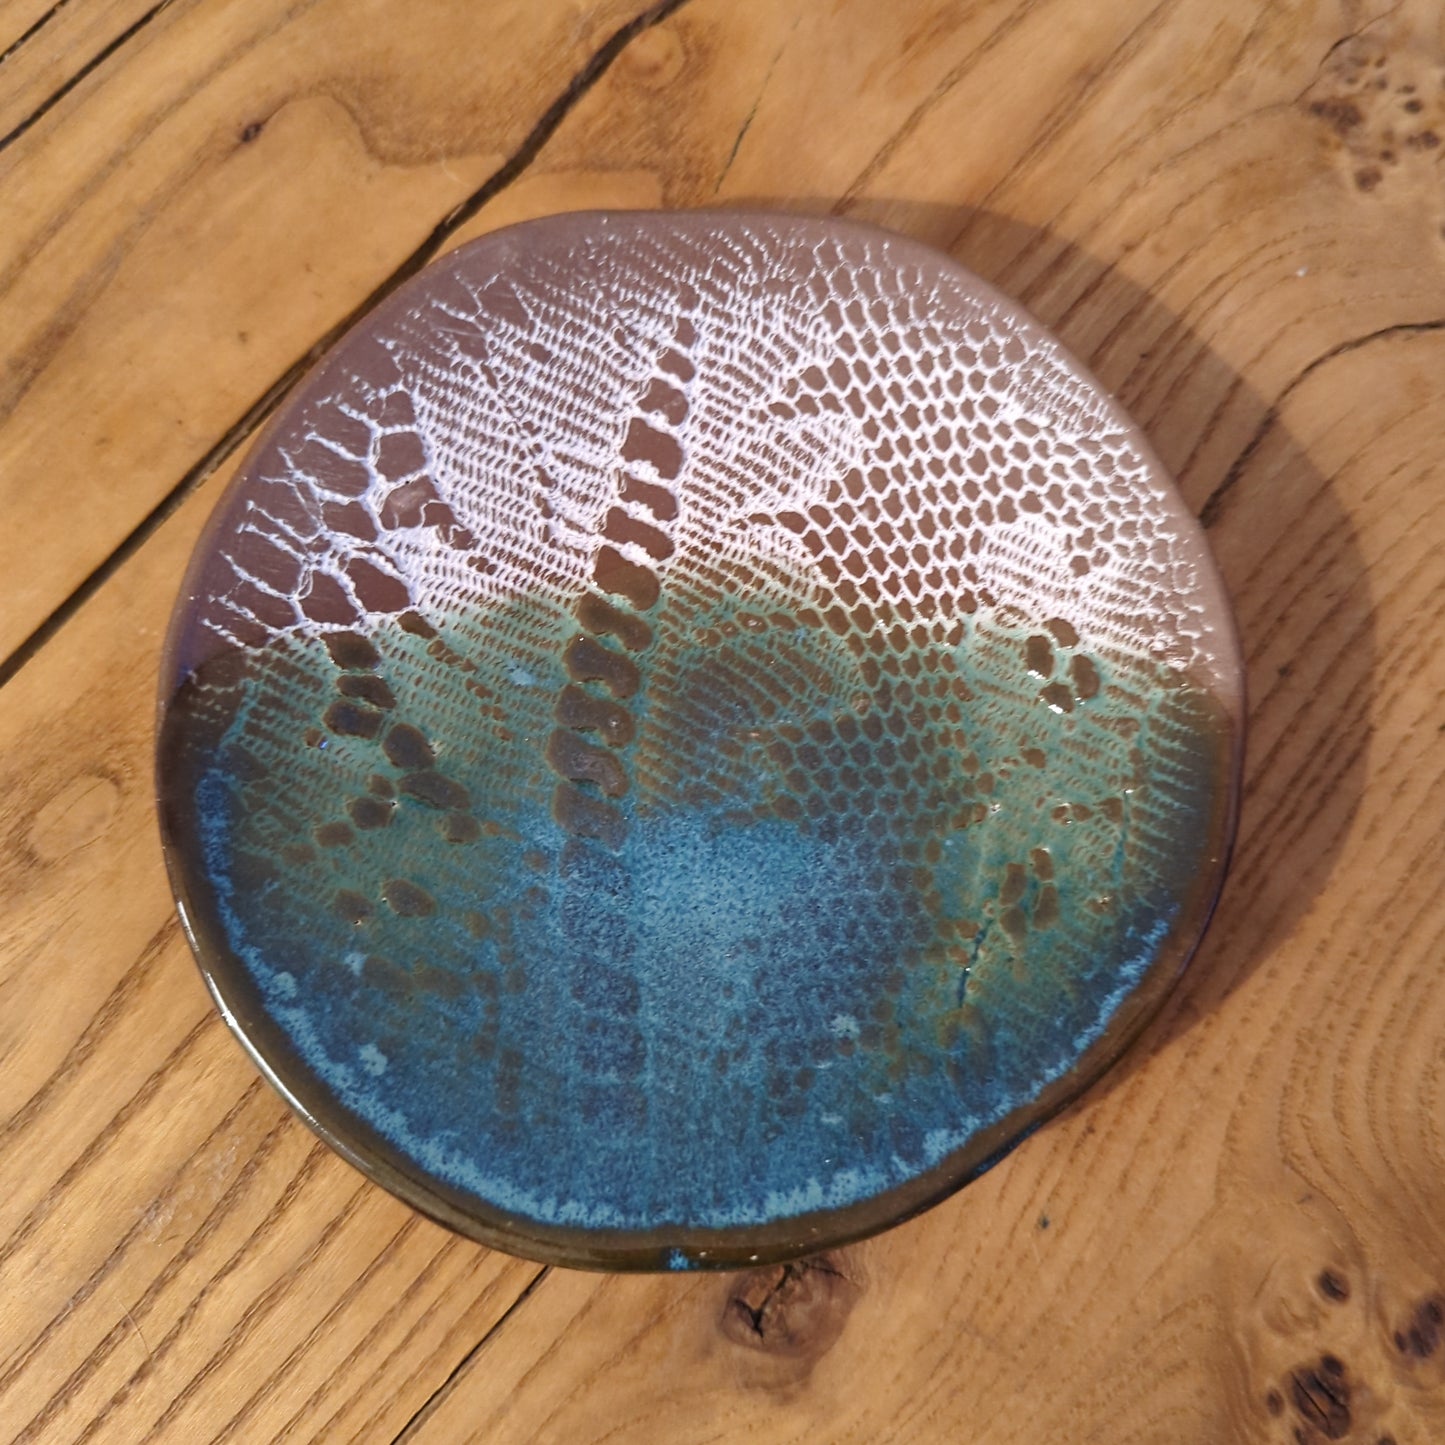 White lace and blue glaze on red clay